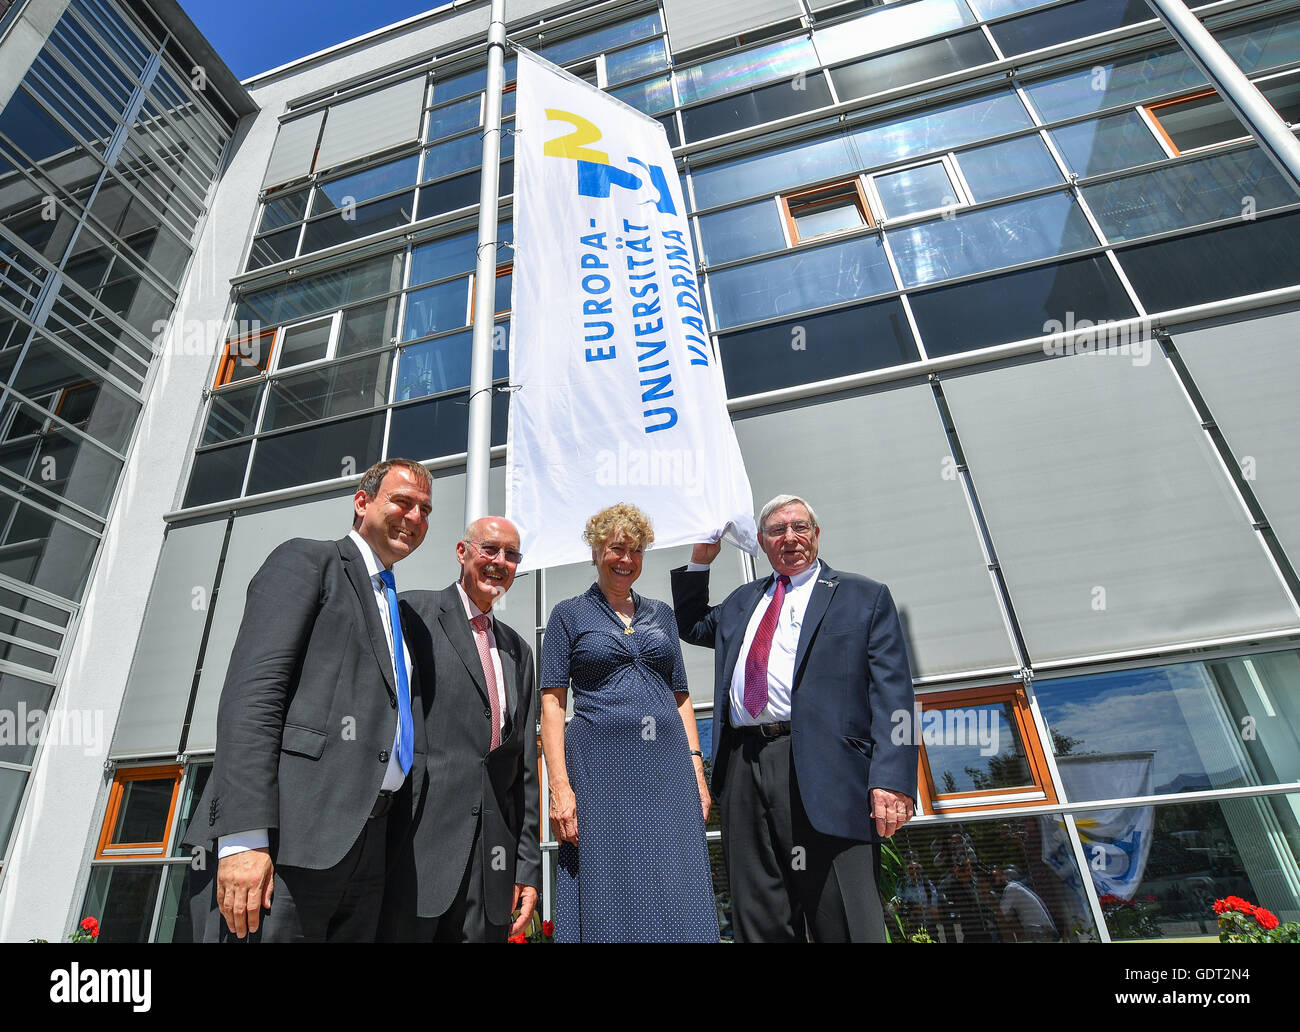 Alexander Woell (L), president of the Viadrina European University, poses with other former rectors and presidents of the university, Hans N. Weiler (R-L), Gesine Schwan and Gunter Pleuger after raising a flag with them to mark the 25th anniversary of the university in Frankfurt/Oder, Germany, 21 July 2016. A ceremonial act marking the 25th anniversary of the Viadrina European University was held on the same day. Photo: PATRICK PLEUL/dpa Stock Photo